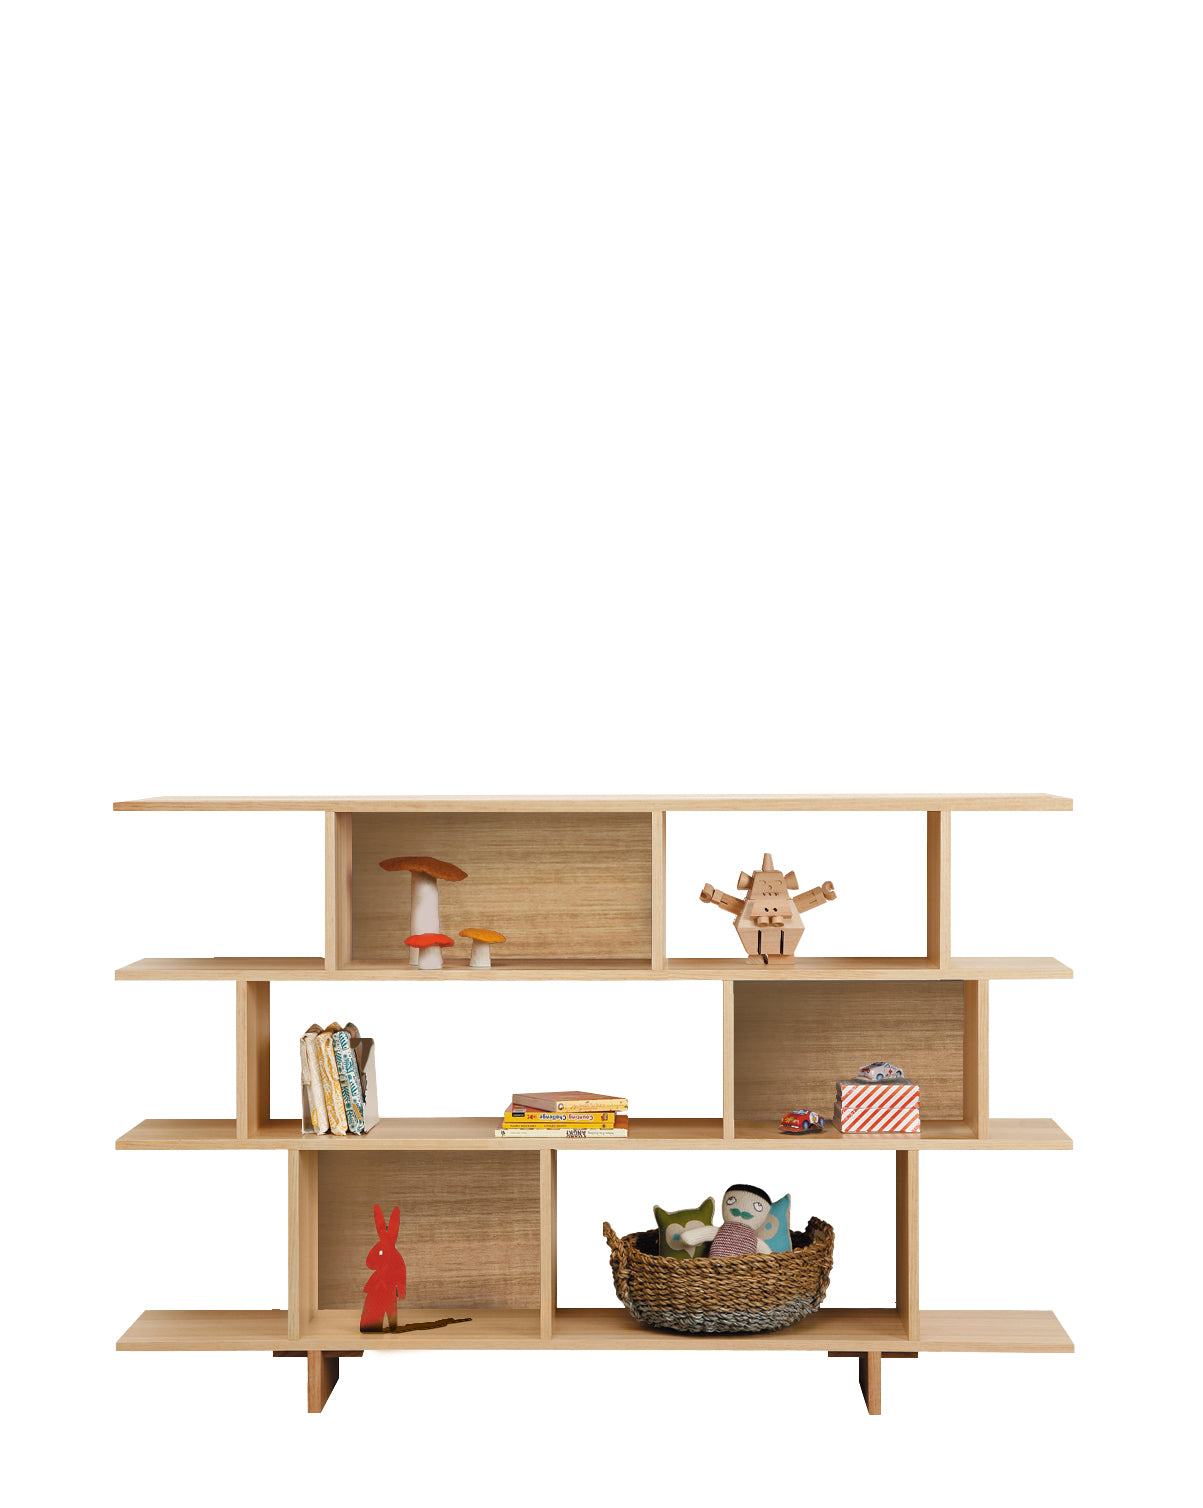 This perfectly handy bookcase offers equal amounts of versatility and practicality. Simplifying kid's spaces with handy nooks for books and toys to be packed away. Ideal for smaller spaces, the slimline profile sits easily under windows and narrow spaces.